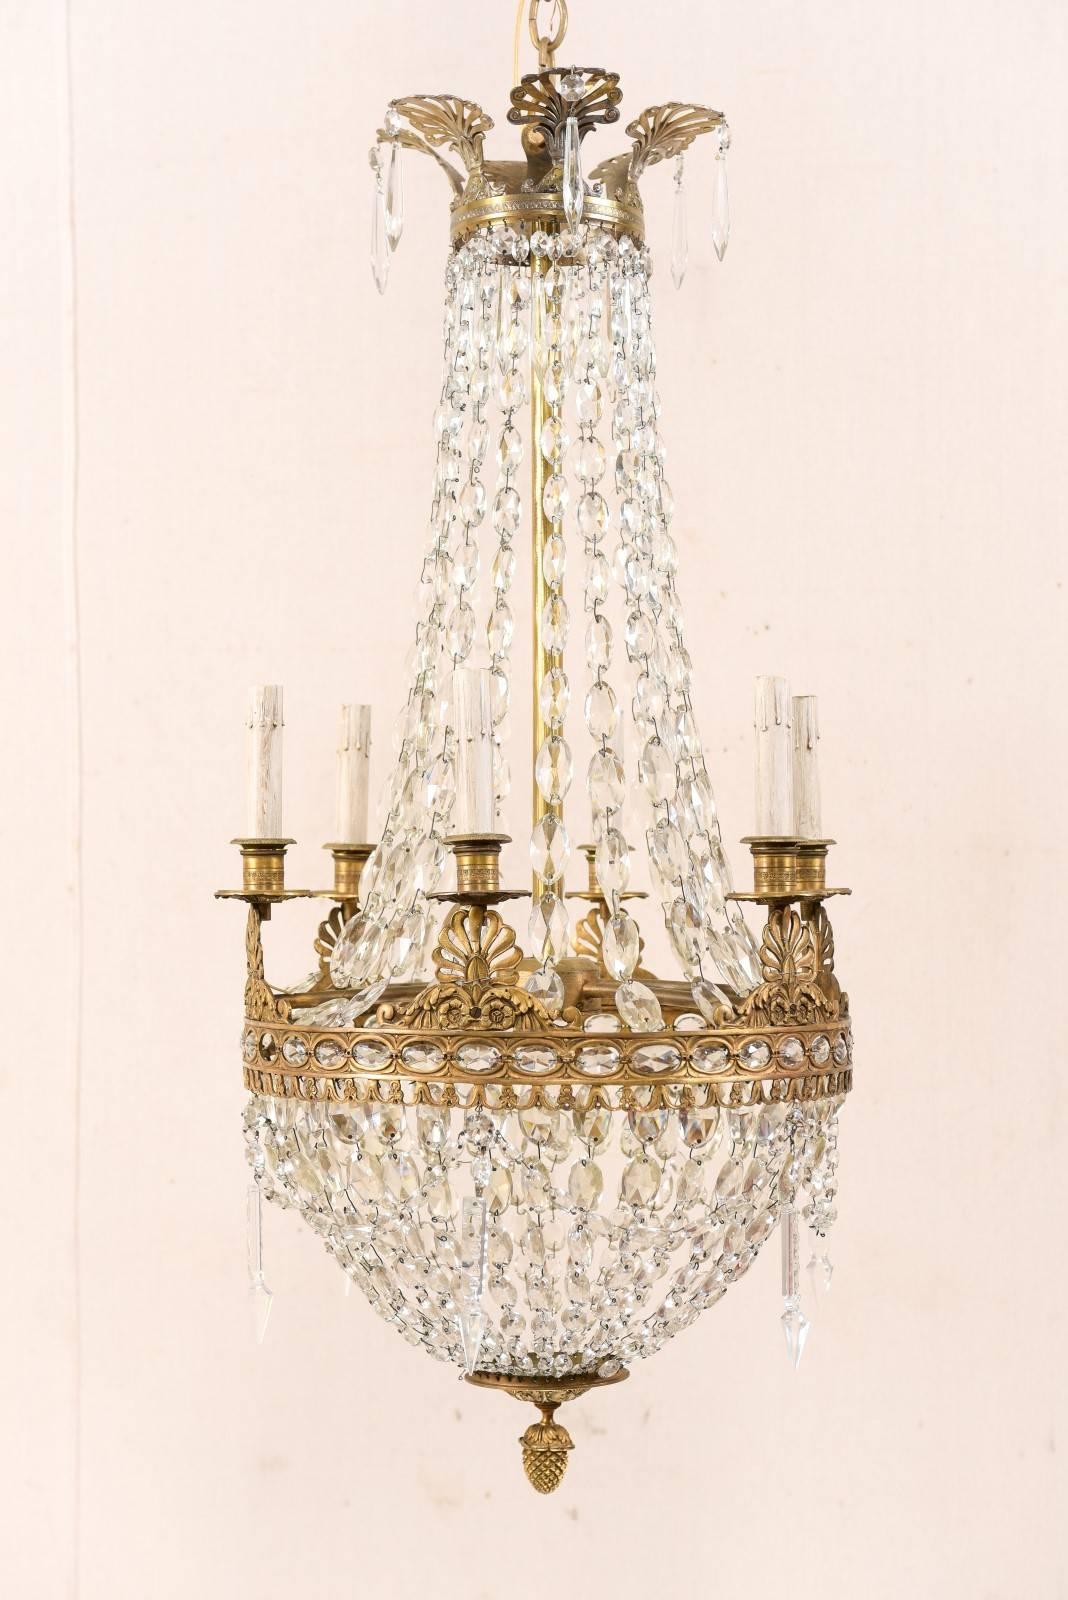 Beaded An Exquisite Italian Mid-century Basket-Shaped Crystal and Brass Chandelier For Sale